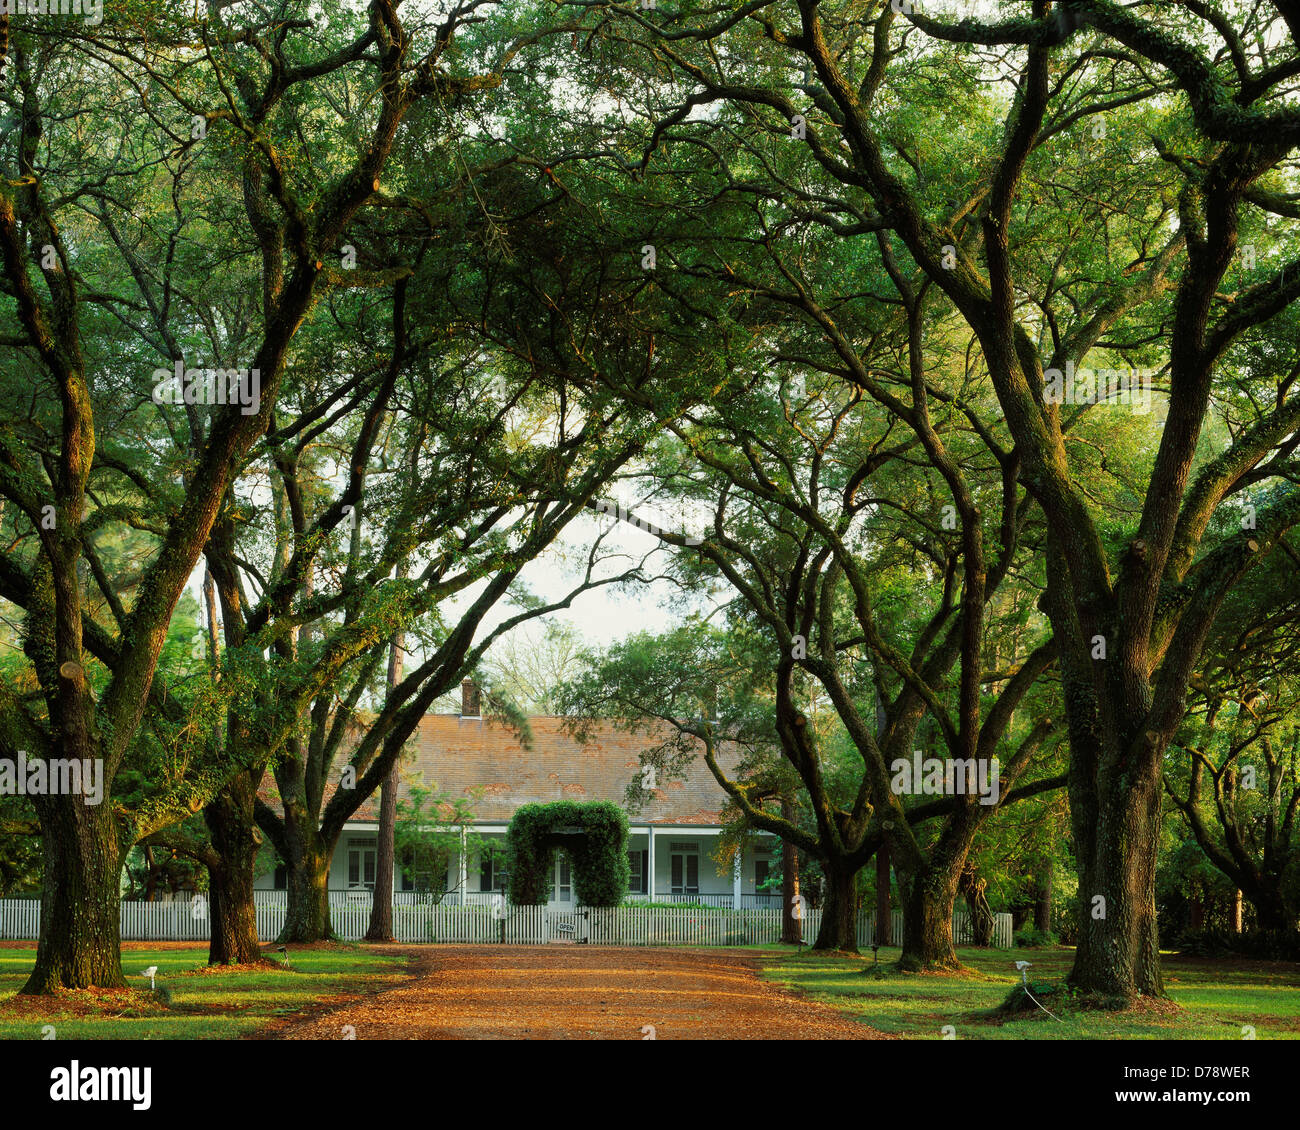 Live oak allee leading to Beau Fort Plantation house example Creole architecture built about 1790 Cane River National Heritage Stock Photo